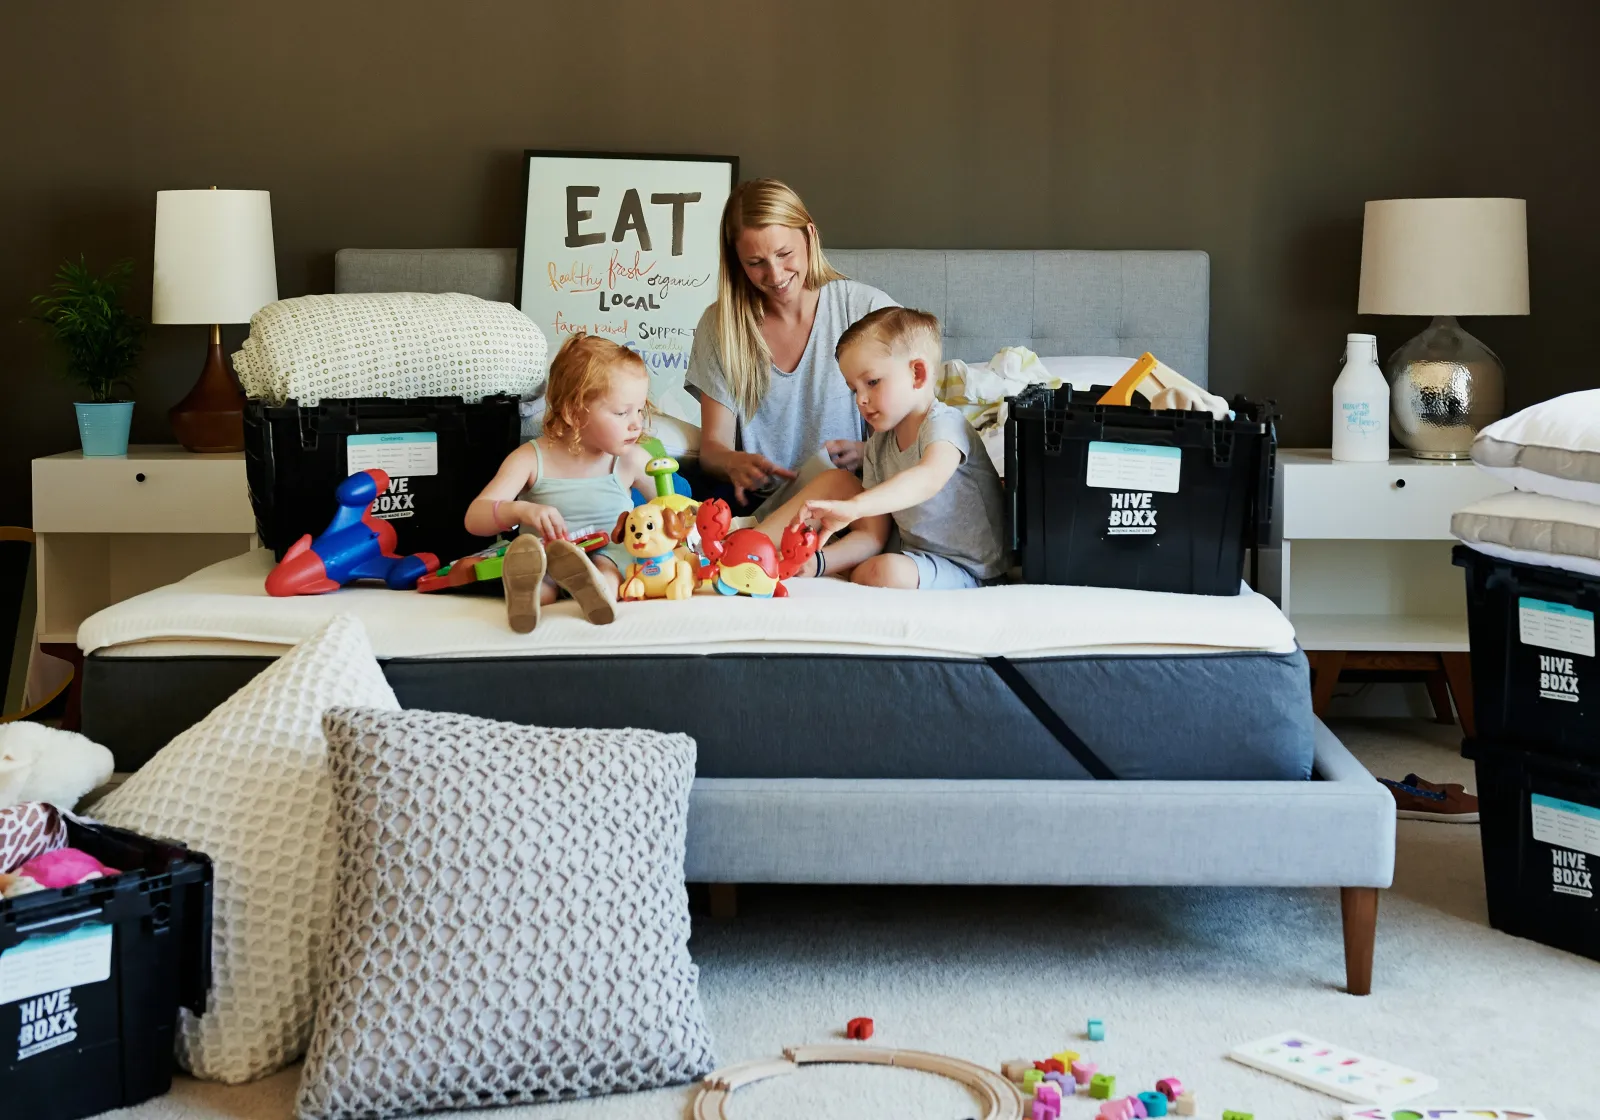 mom with two kids playing on an unmade bed with toys and boxes on the bed, as they are surrounded by moving boxes and disarray as they try to move into their new home with carpet